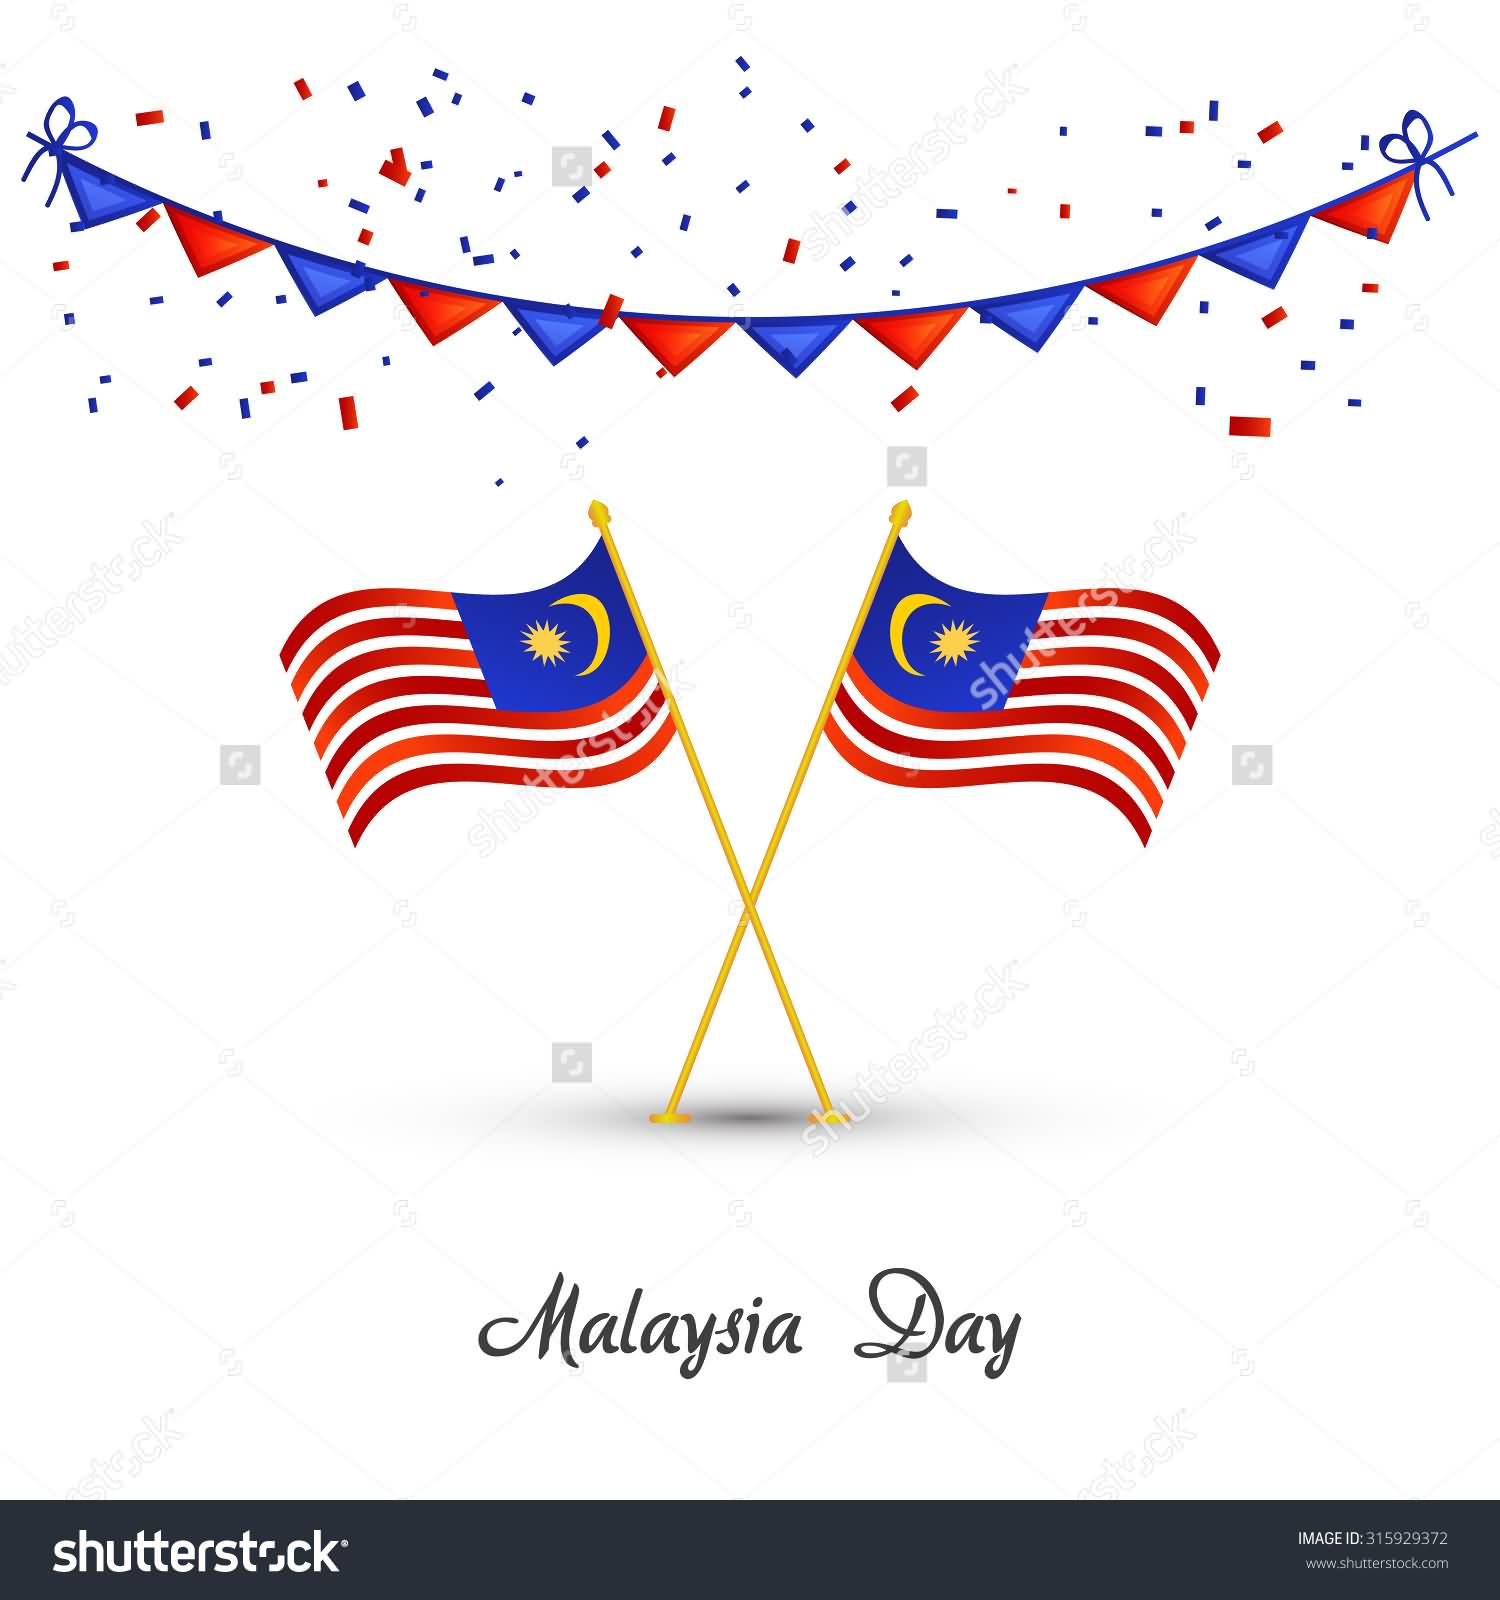 Malaysia Day Cross Flags And Banner Illustration